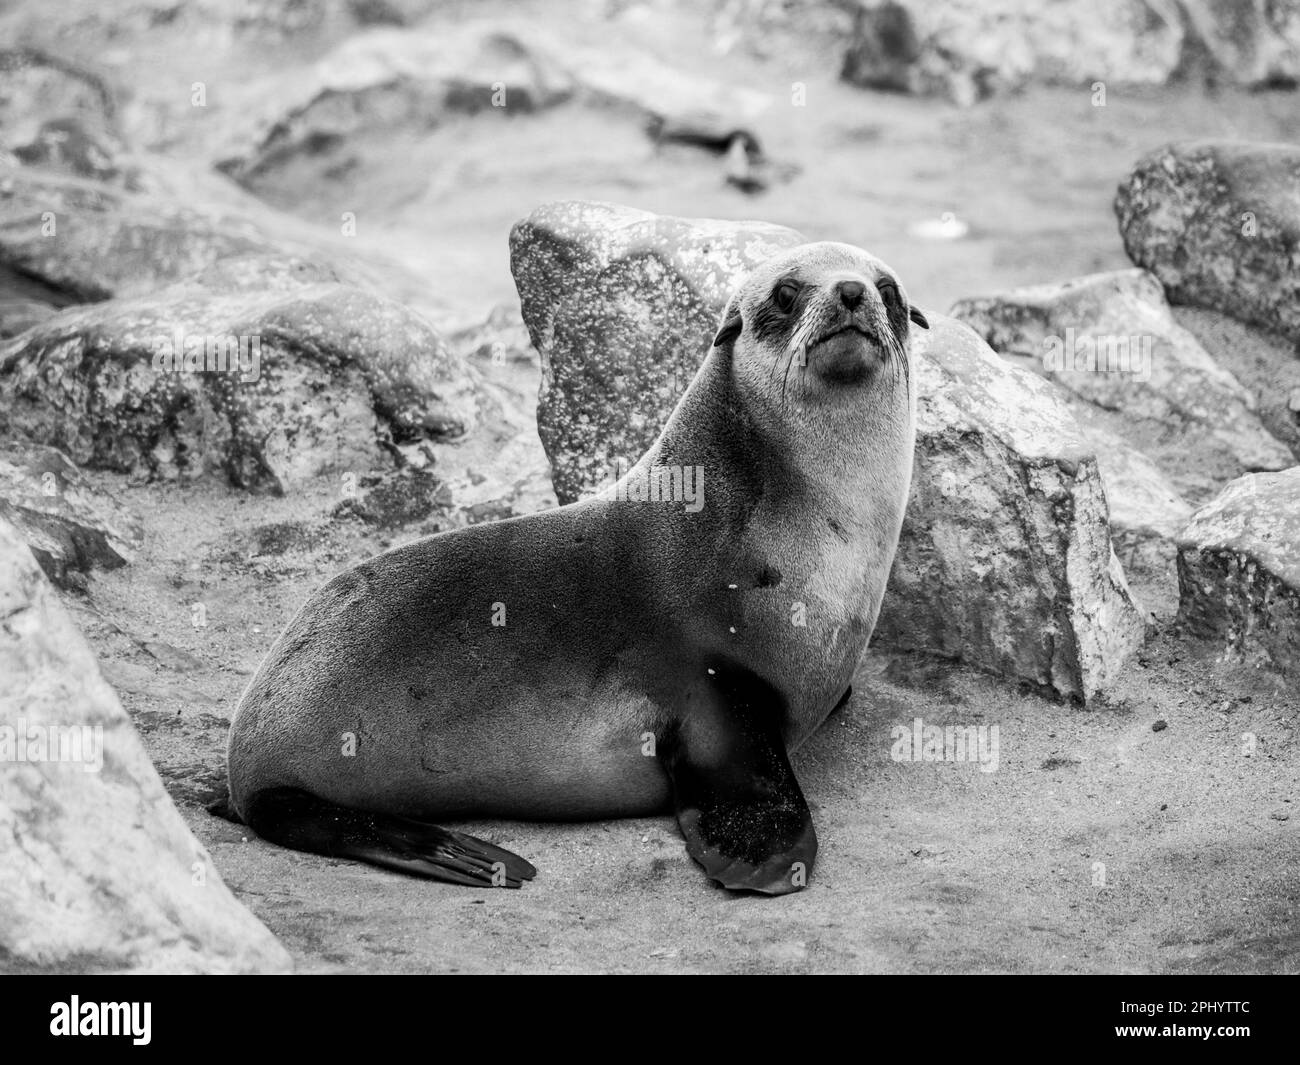 Young Brown Fur Seal, Arctocephalus pusillus, colony at Cape Cross, on Skeleton Coast of Atlantic Ocean, near Henties Bay in Namibia, Africa. Black and white photography. Stock Photo